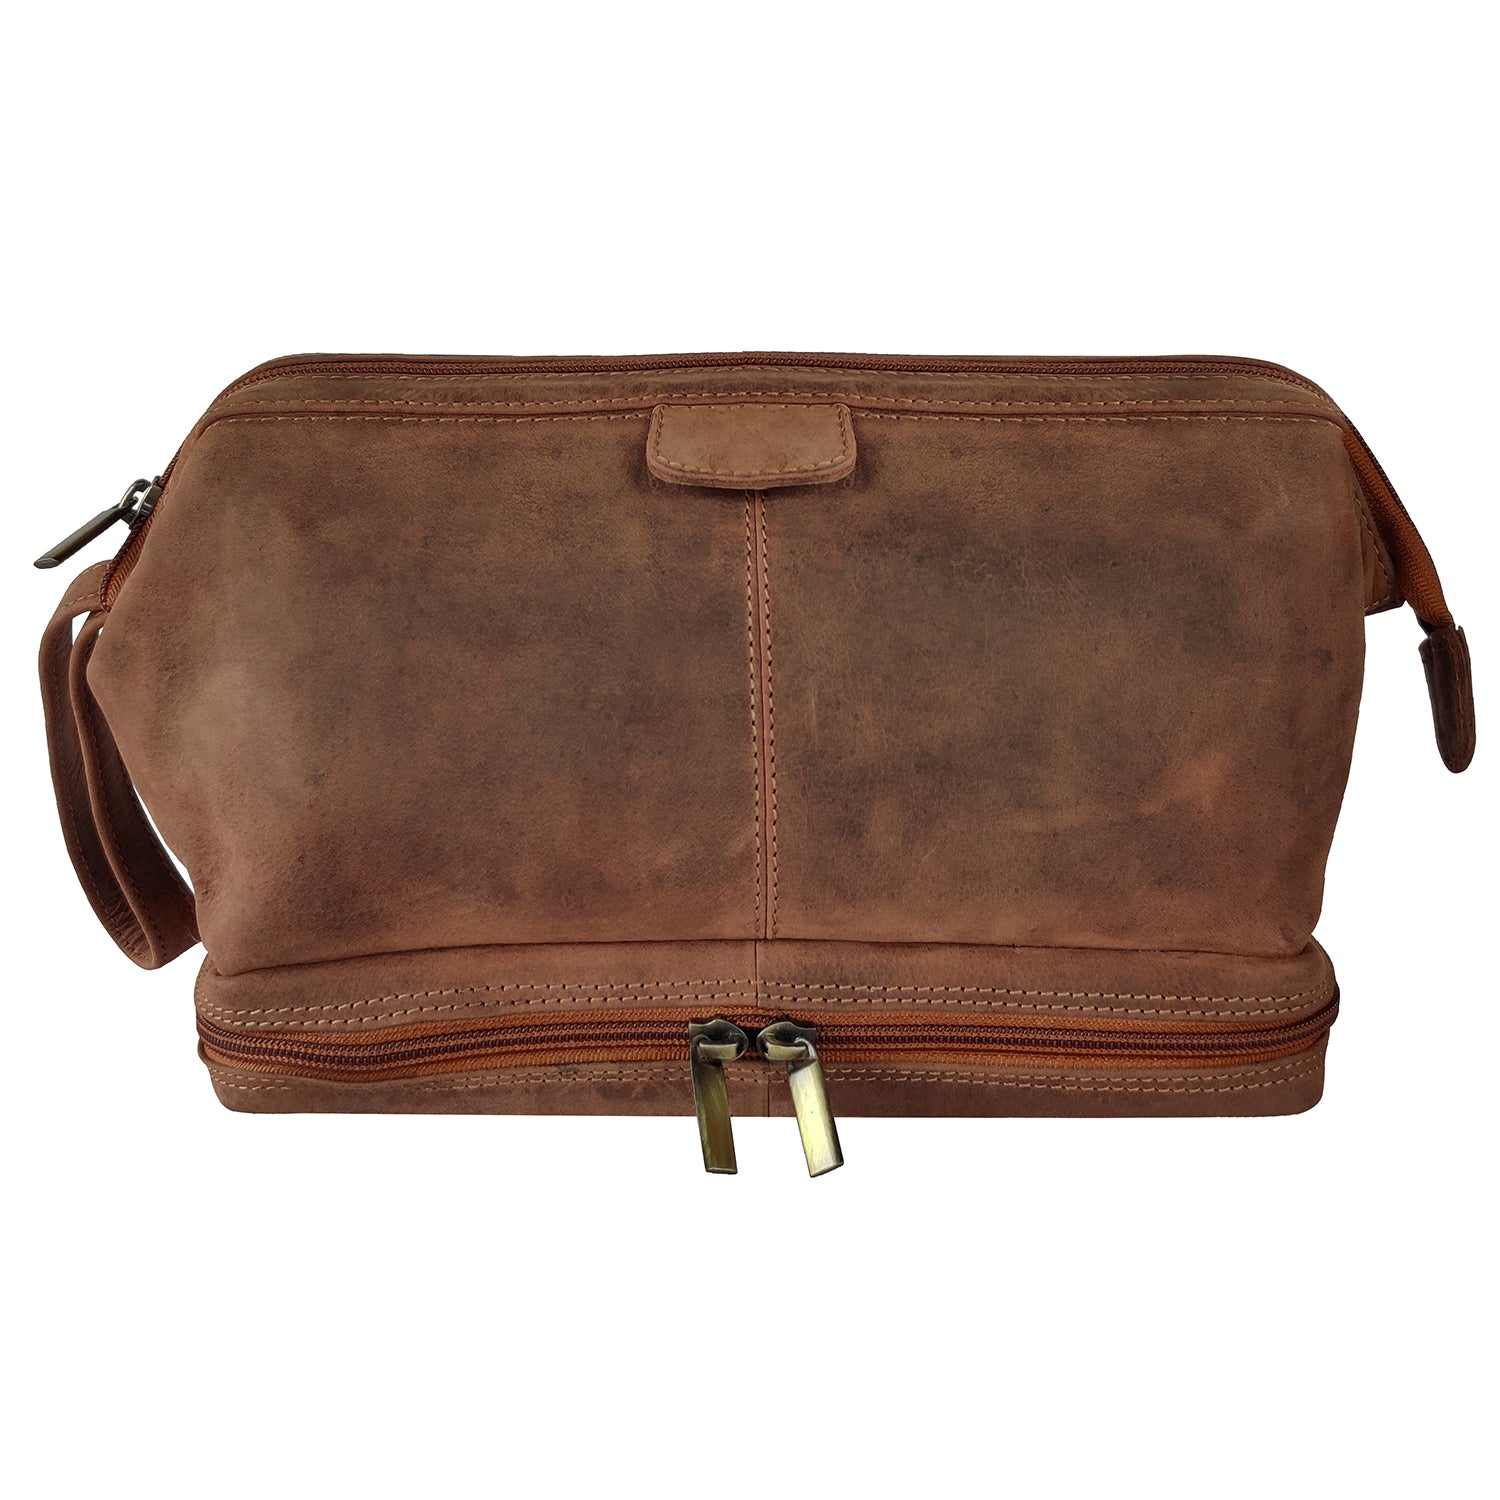 Tan Leather Make-Up Toiletry Bag | Personalized Small Cosmetics Bag – MAHI  Leather